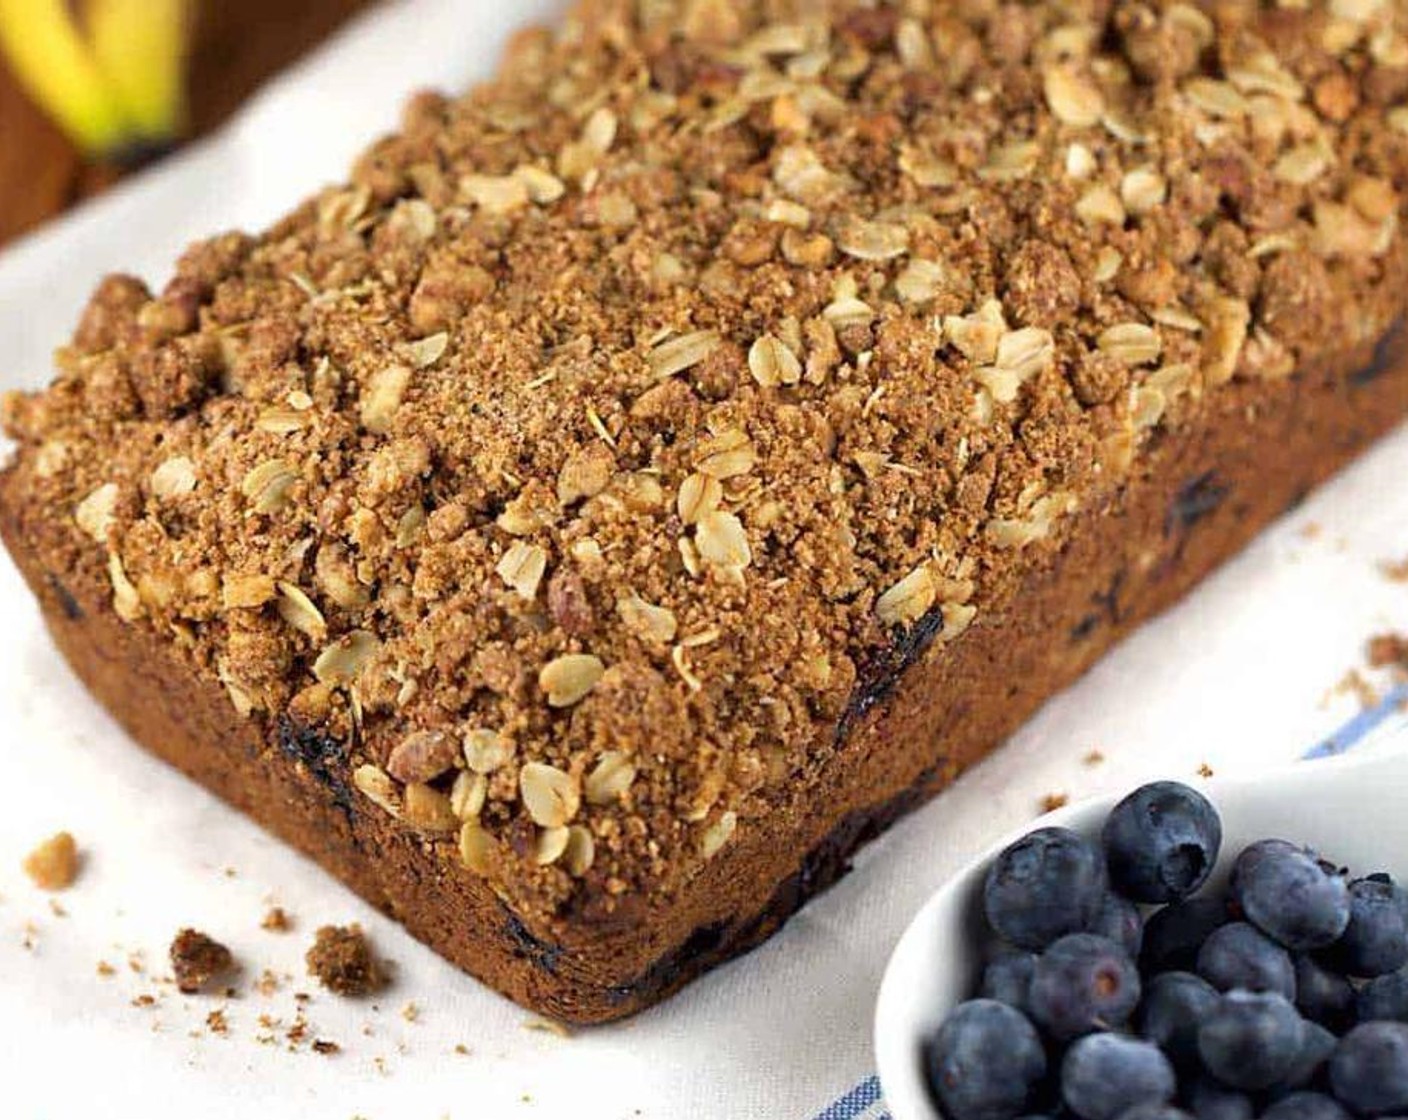 Whole Wheat Vegan Blueberry Banana Bread with Oat Crumble